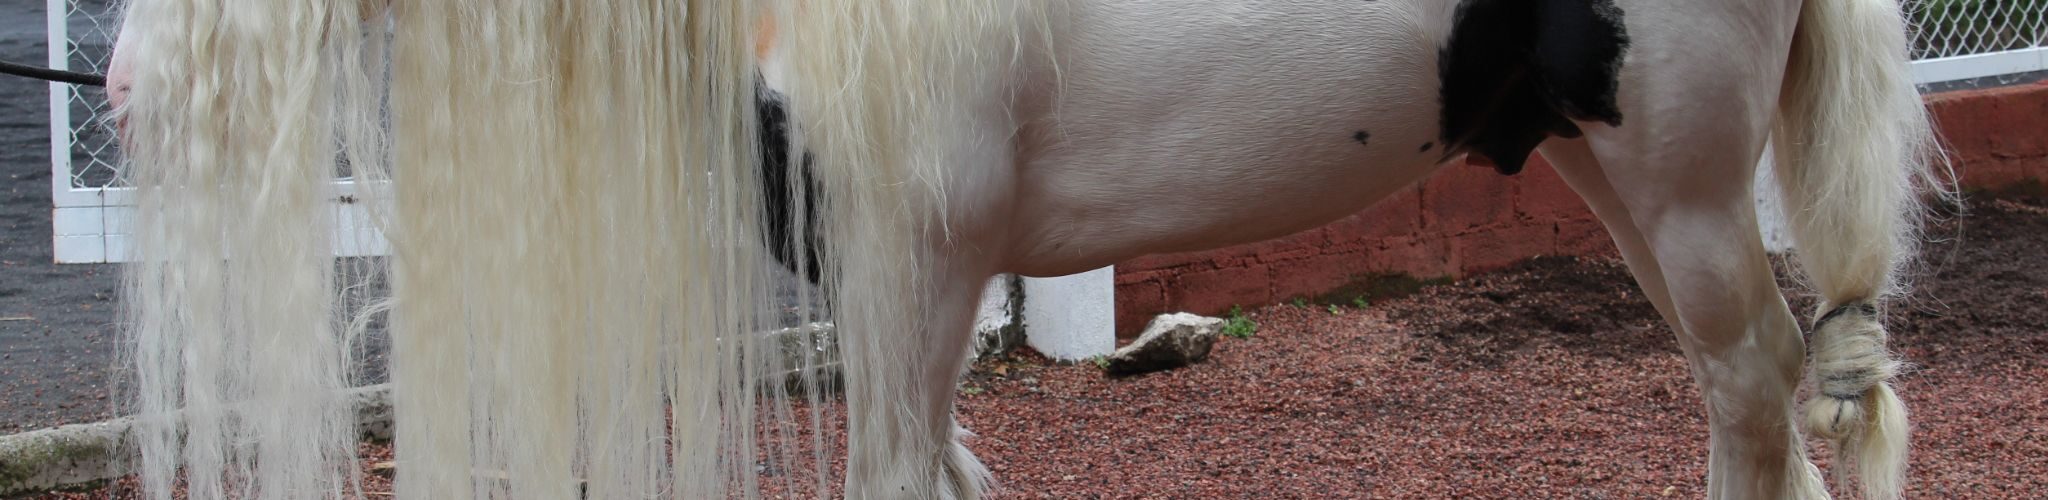 horse with very long mane